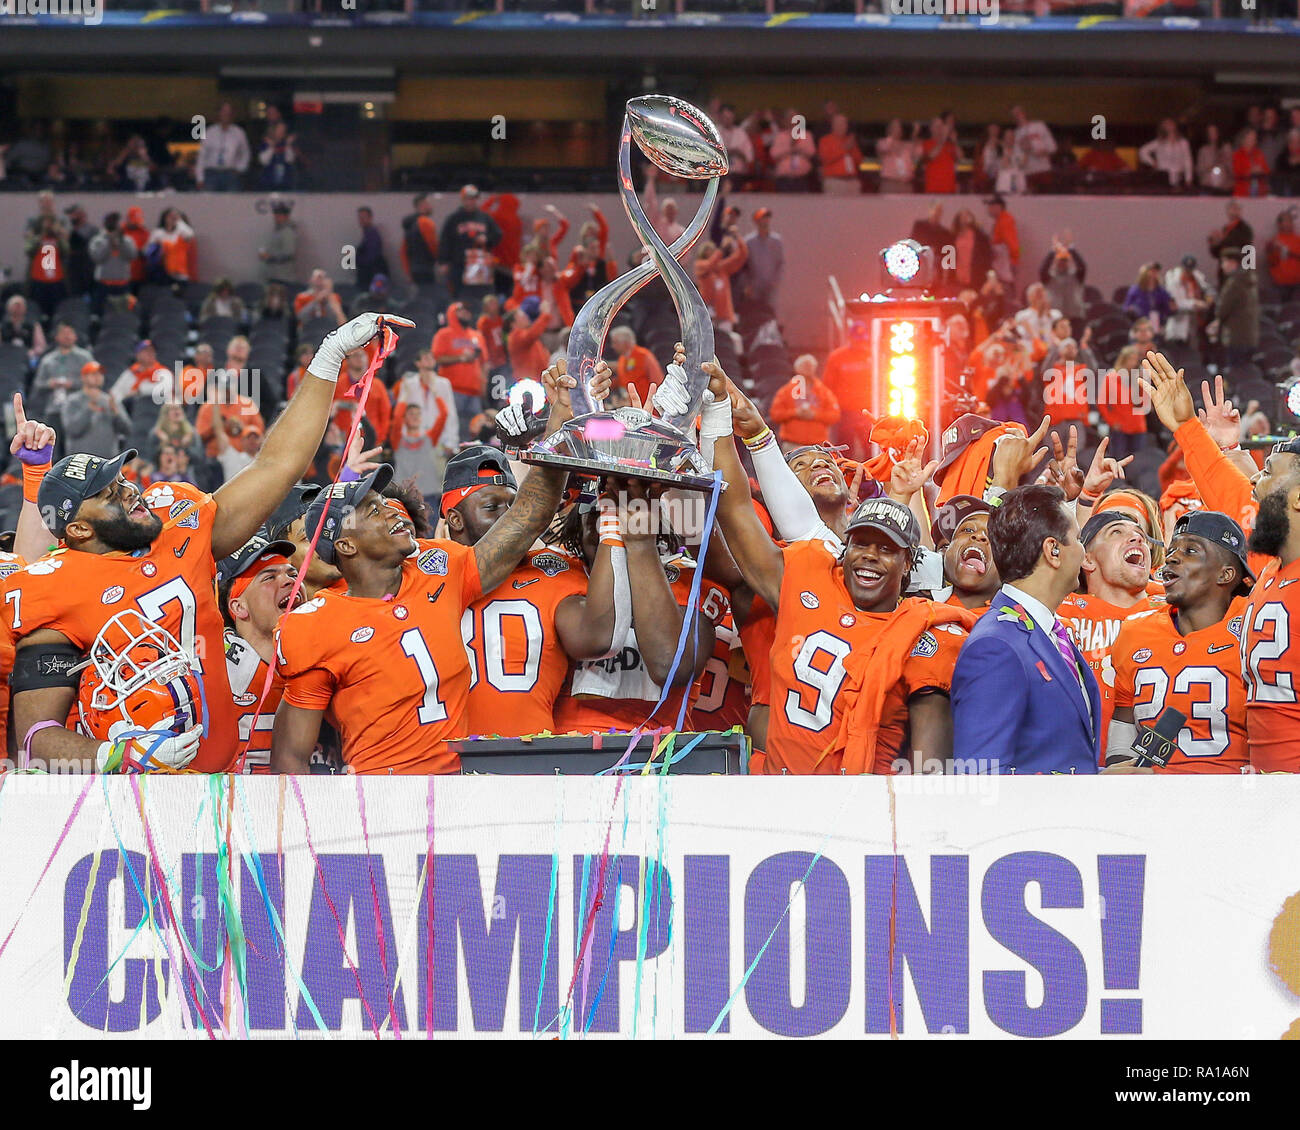 Arlington, TX, USA. 29th Dec, 2018. Clemson running back Travis Etienne (9) and Clemson wide receiver Trevion Thompson (1) lift the Field Scovell Trophy after winning the Cotton Bowl NCAA Football game between the Clemson Tigers and the Notre Dame Fighting Irish at AT&T Stadium in Arlington, TX. Tom Sooter/CSM/Alamy Live News Stock Photo